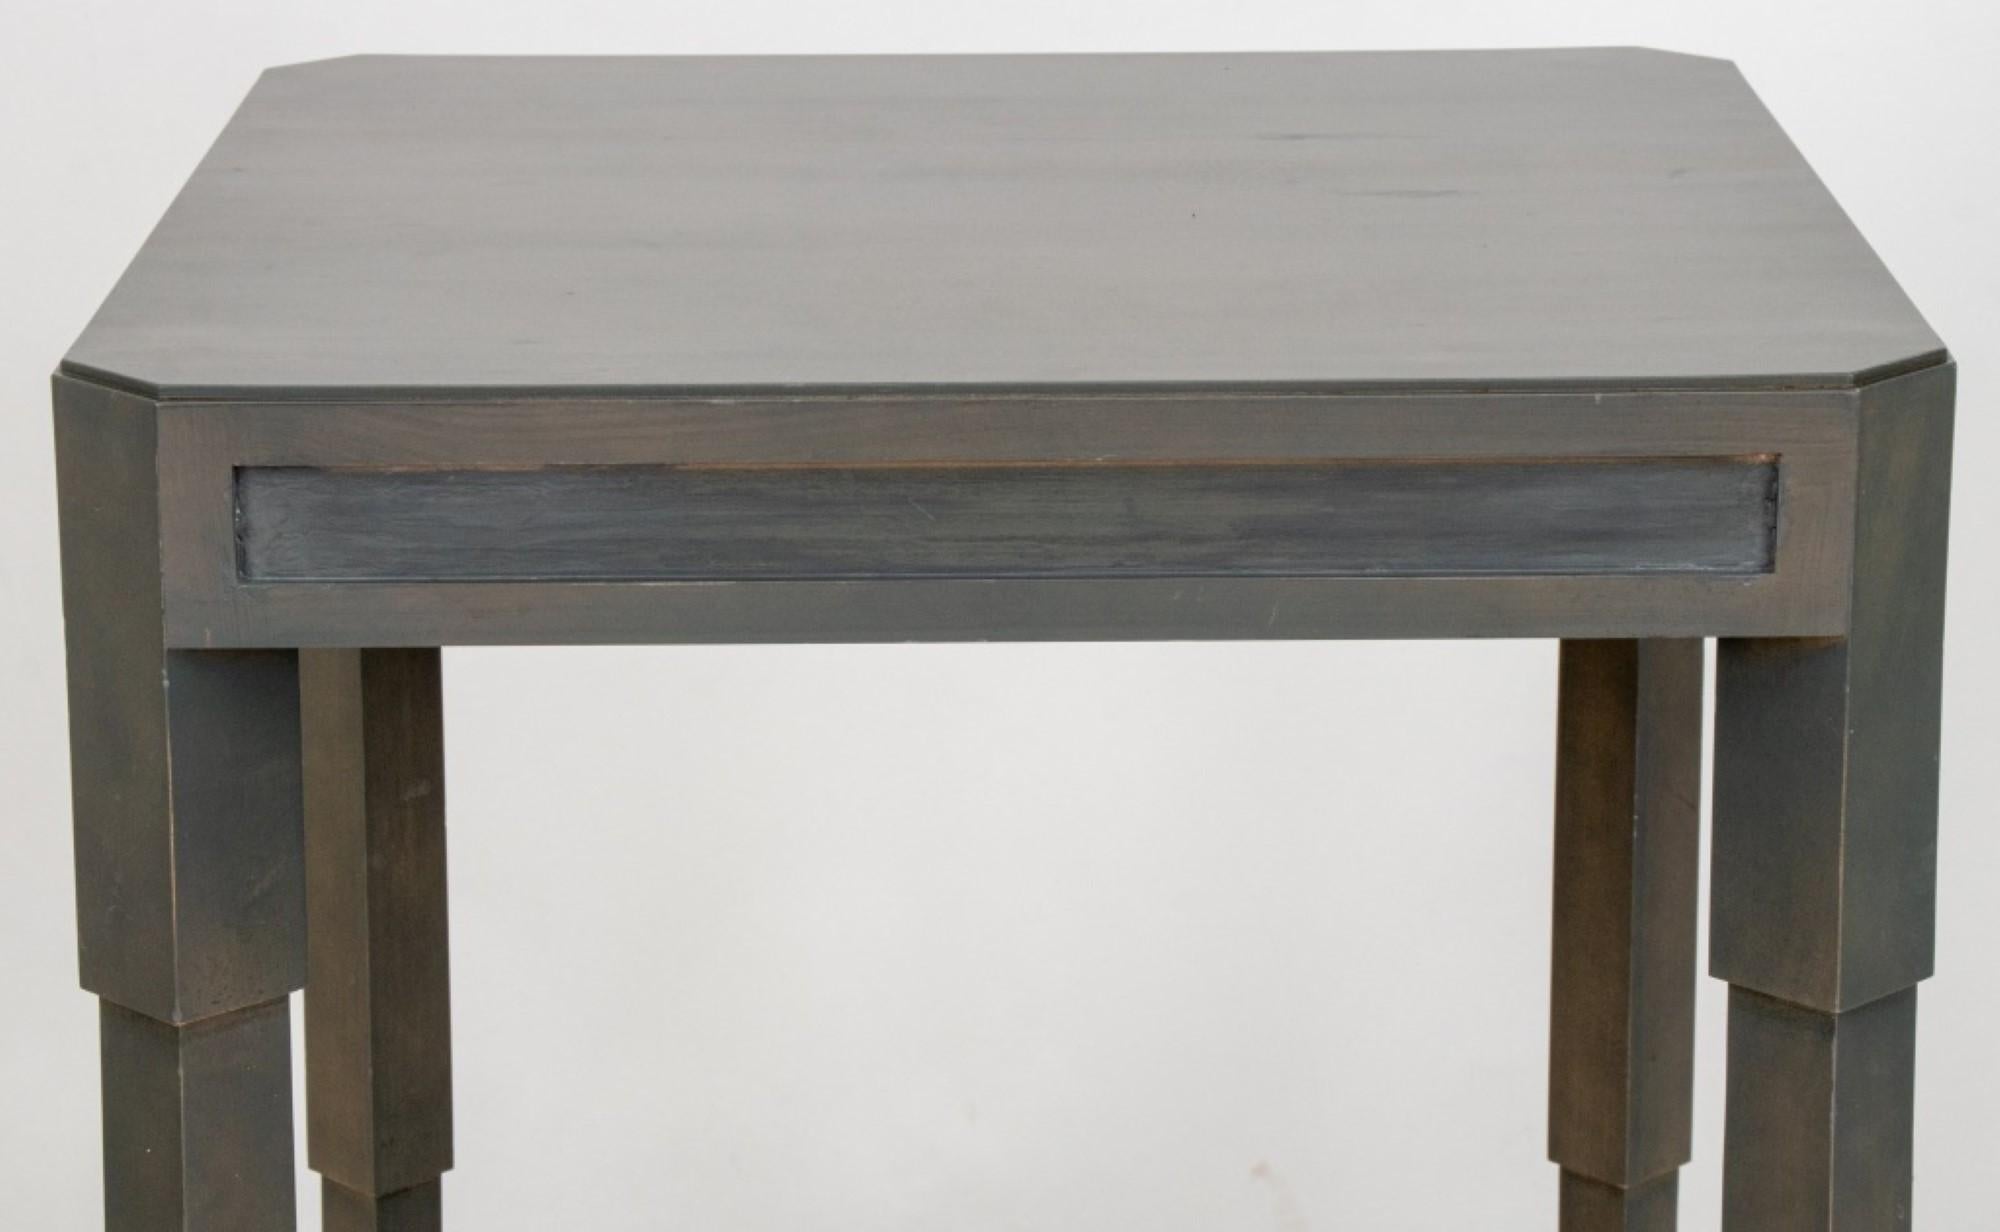 Modern Art Deco style grey painted table.

Dealer: S138XX